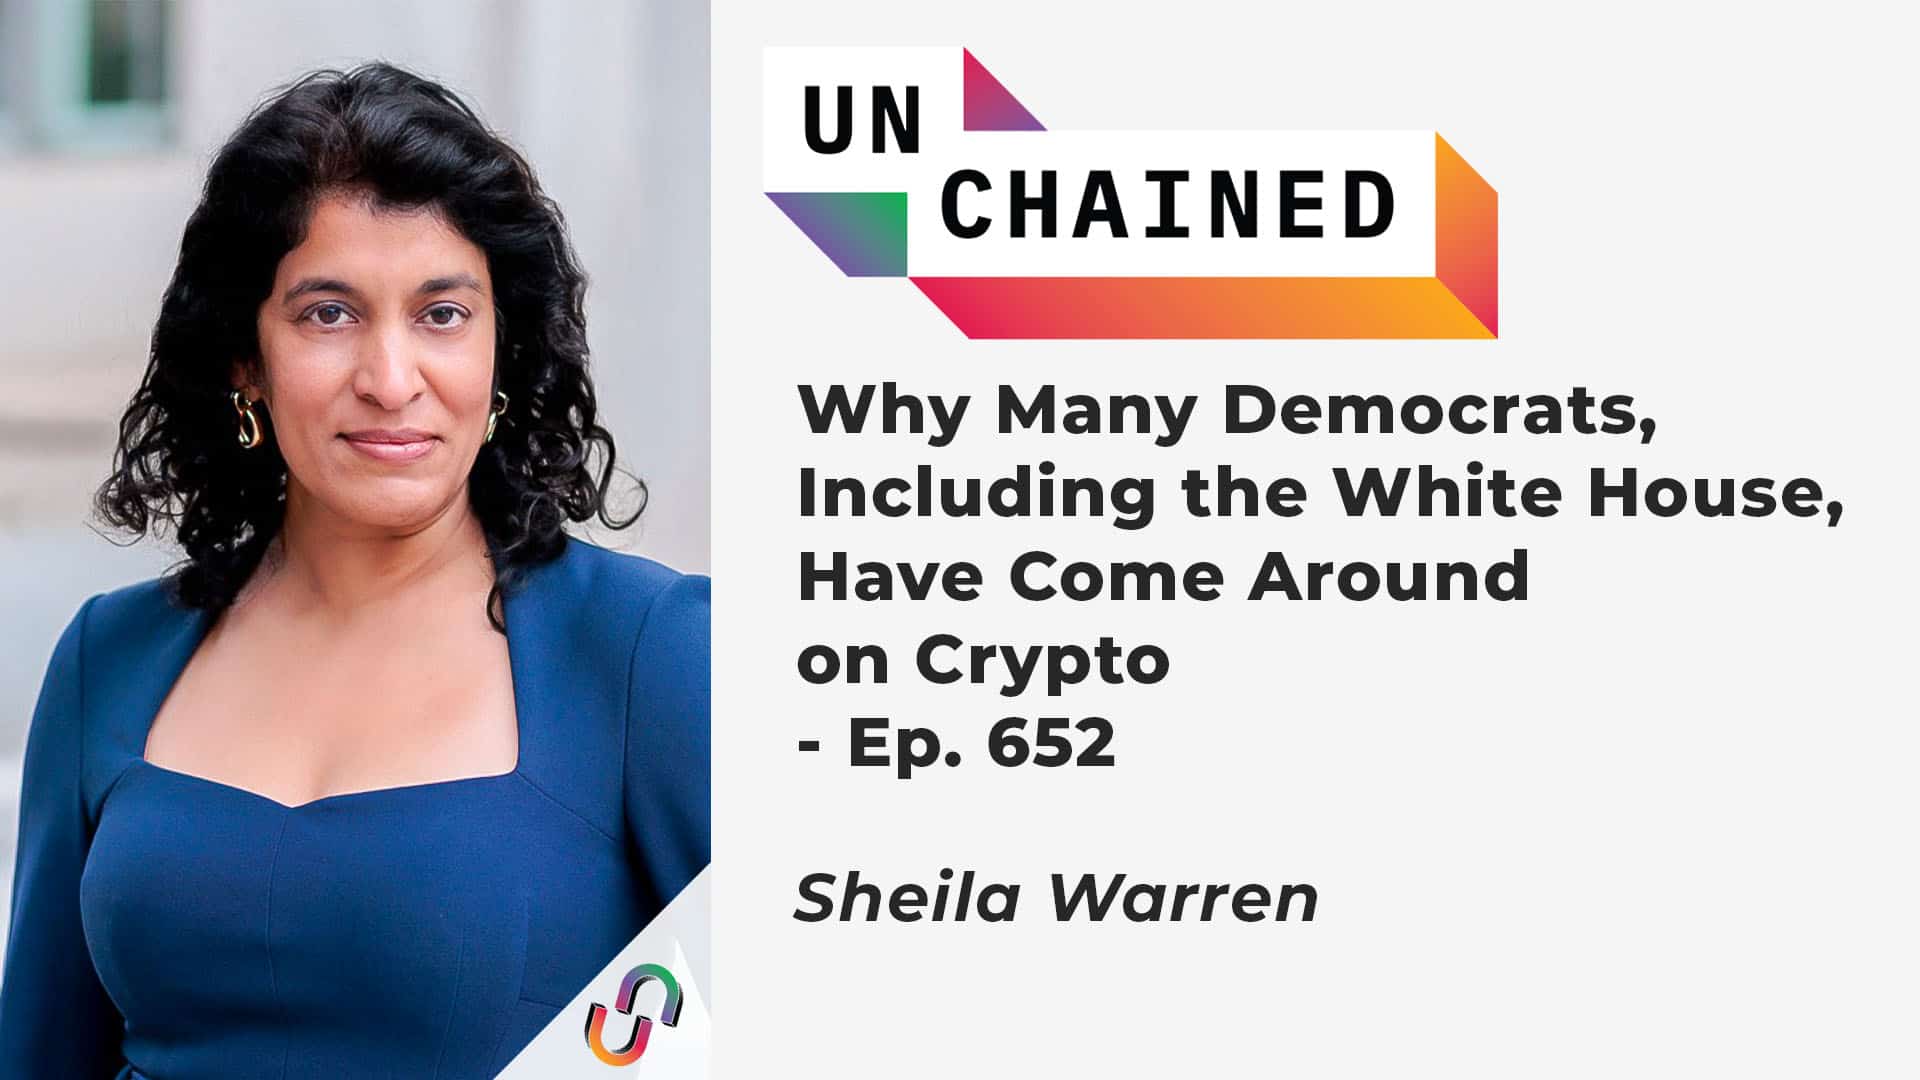 Why Many Democrats, Including the White House, Have Come Around on Crypto - Ep. 652